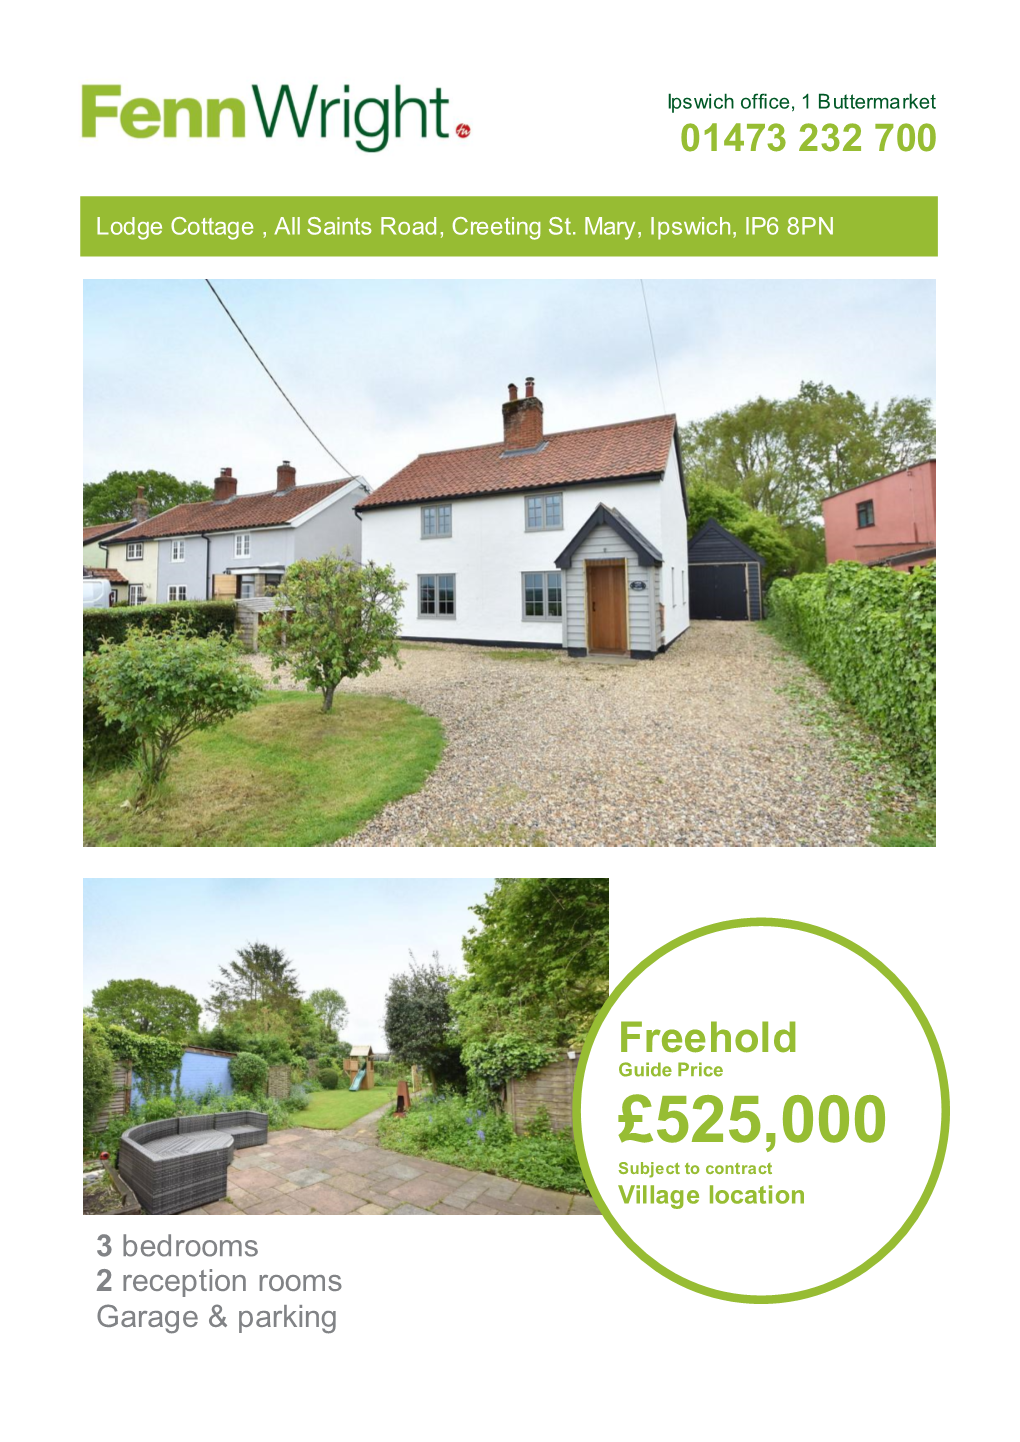 £525,000 Subject to Contract Village Location